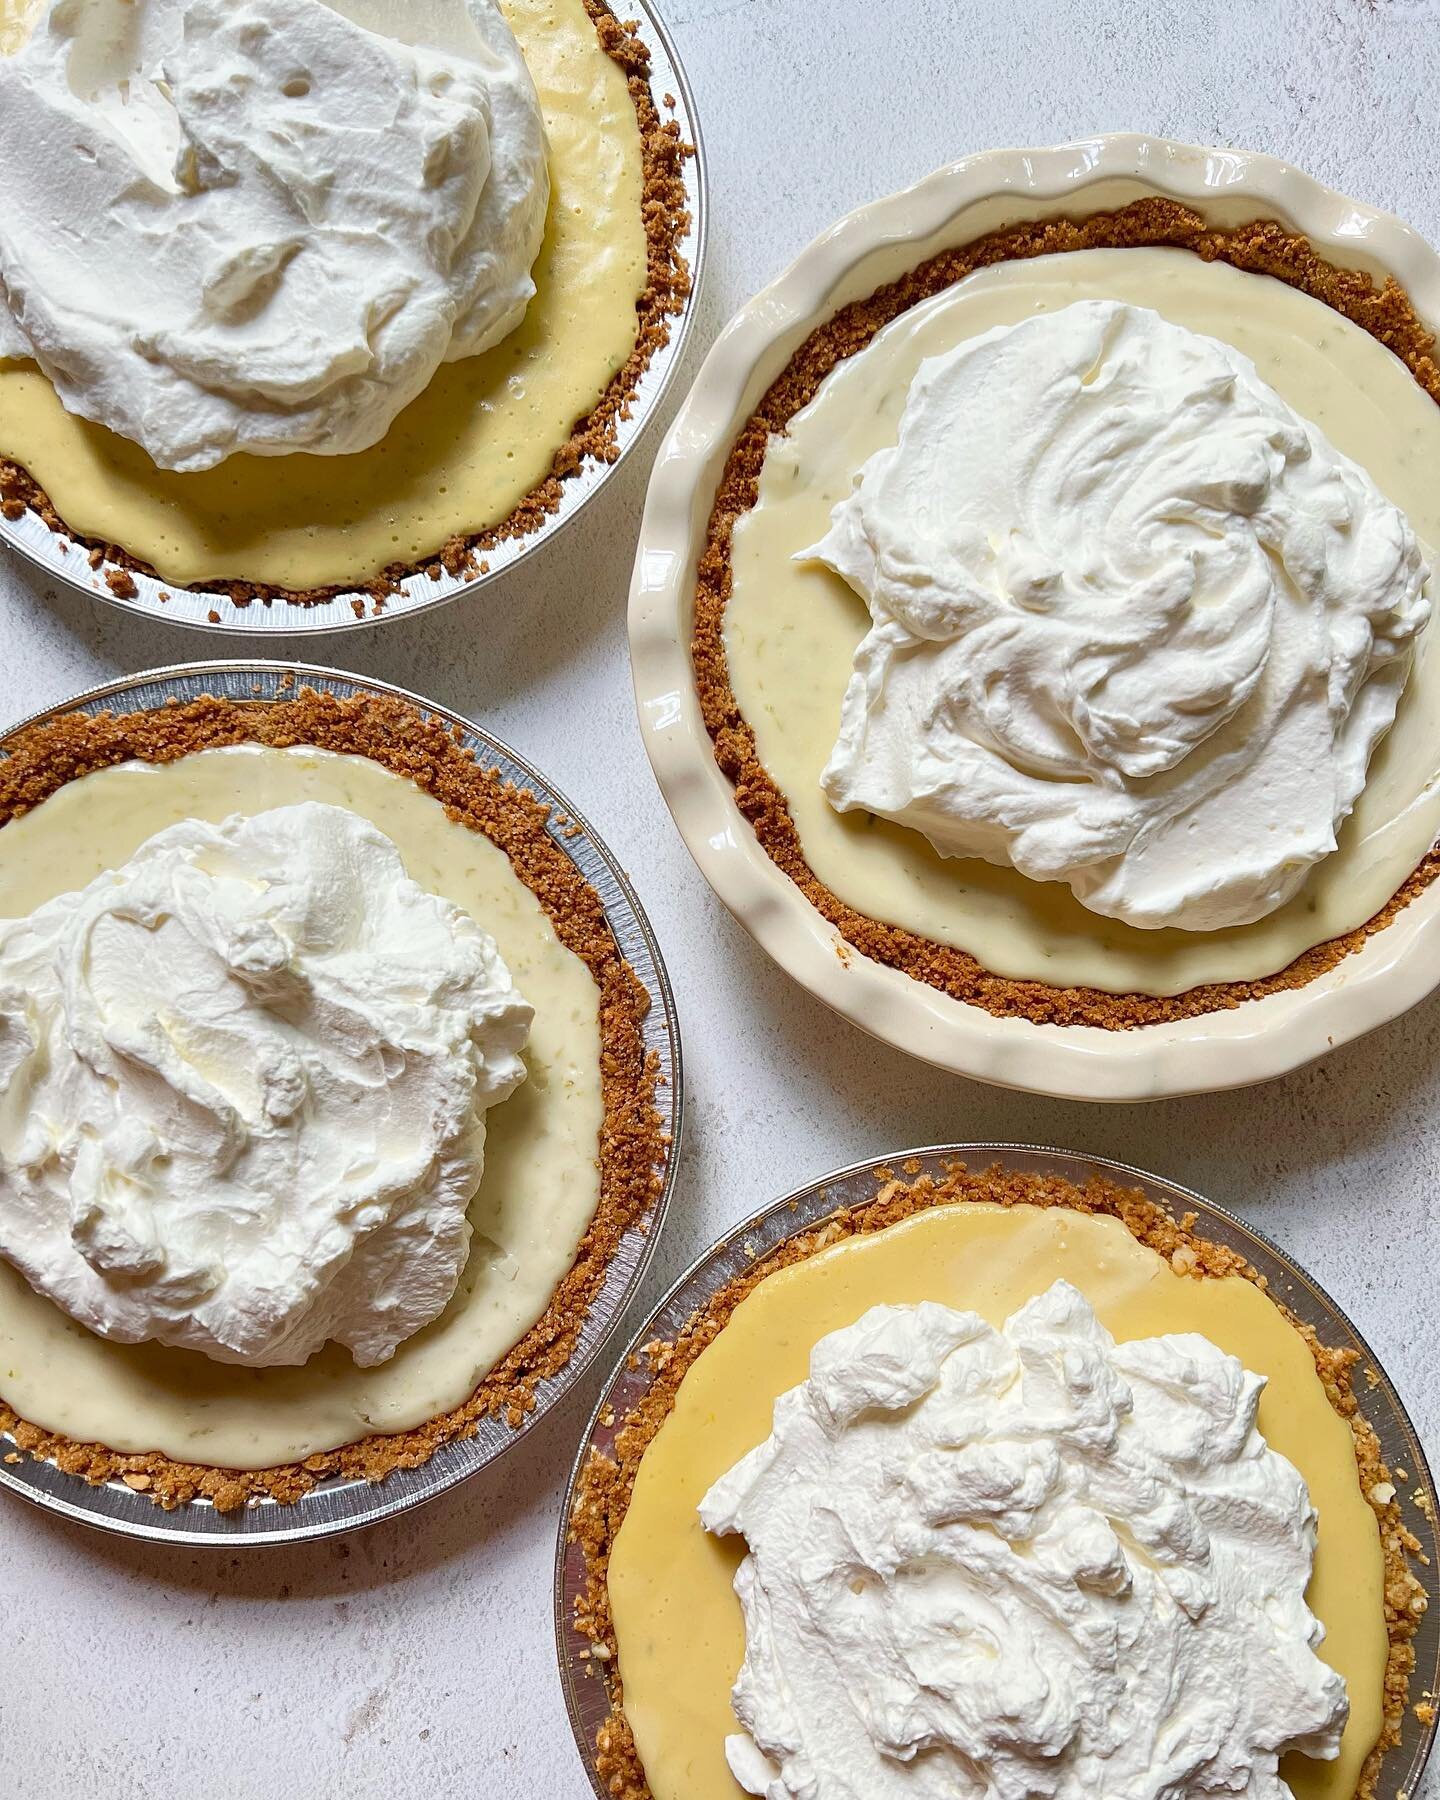 Key lime pie!! I recently tested four popular recipes and wrote about them for @thekitchn. Not a bad one in the bunch, but two really stood out. I posted the link up in my stories if you wanna read about them. #ilovemyjob #keylimepie #recipeshowdown 